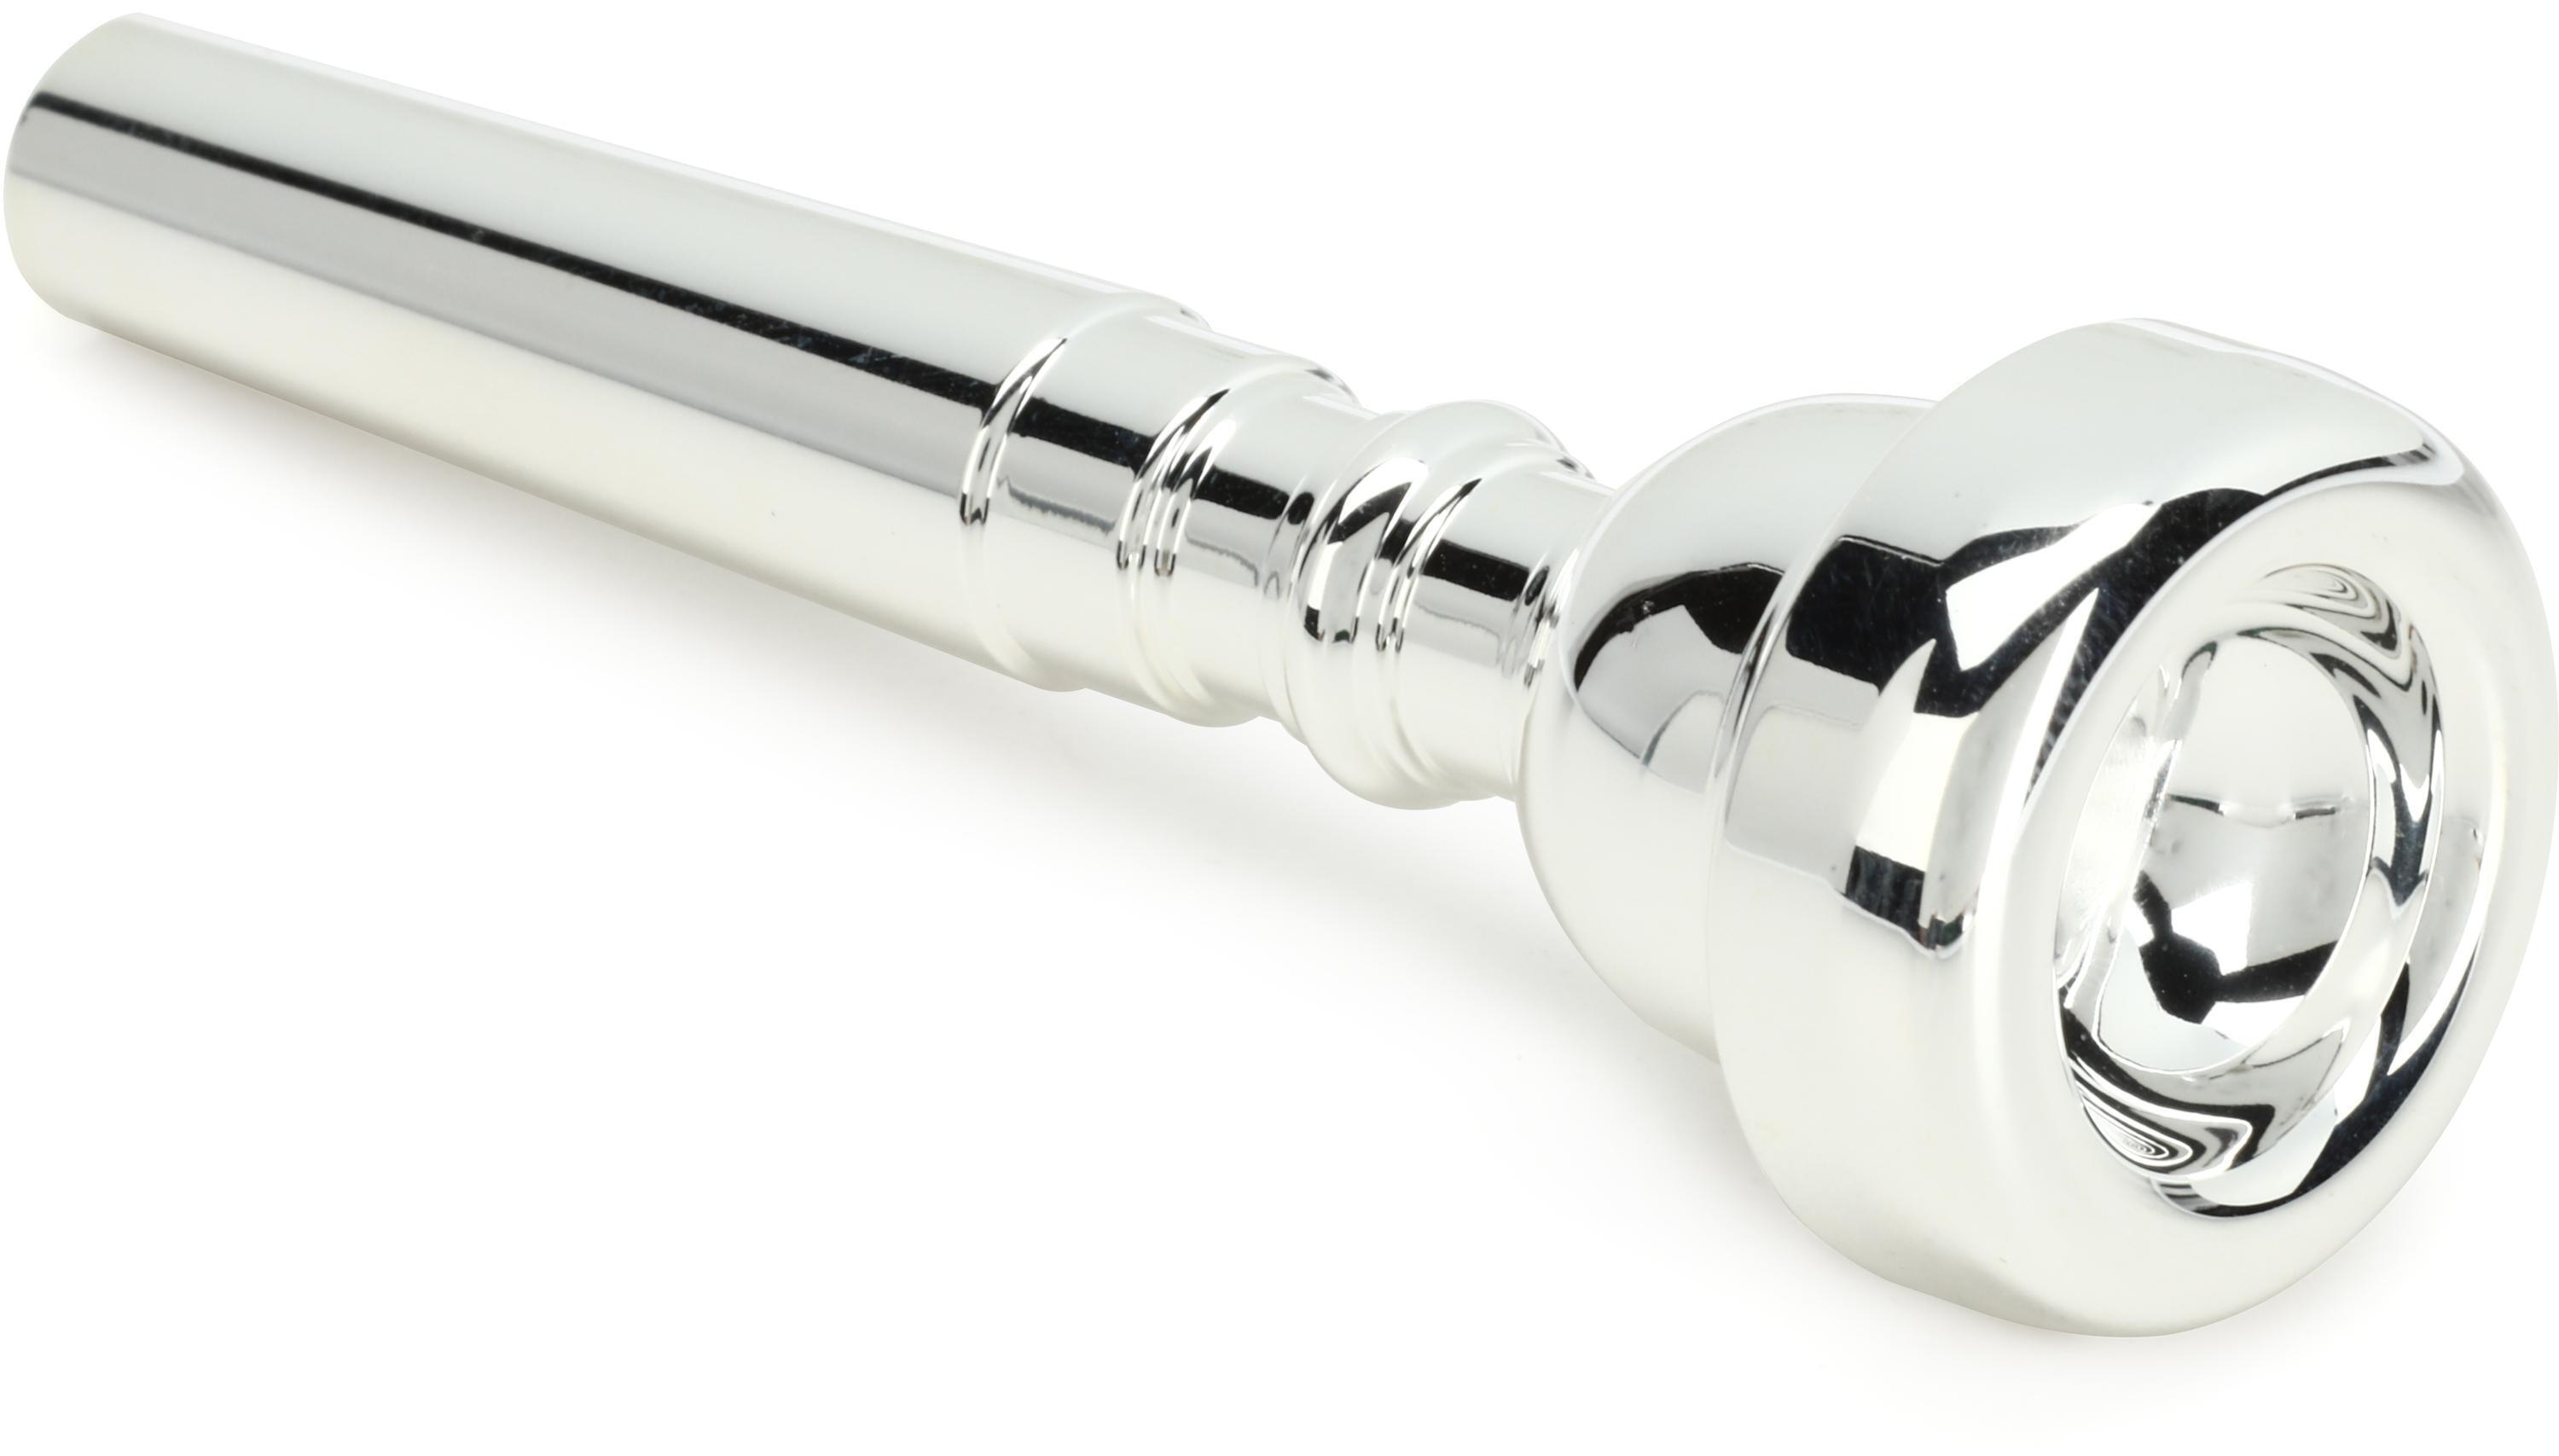 Bach 351 Classic Series Silver-plated Trumpet Mouthpiece - 7E